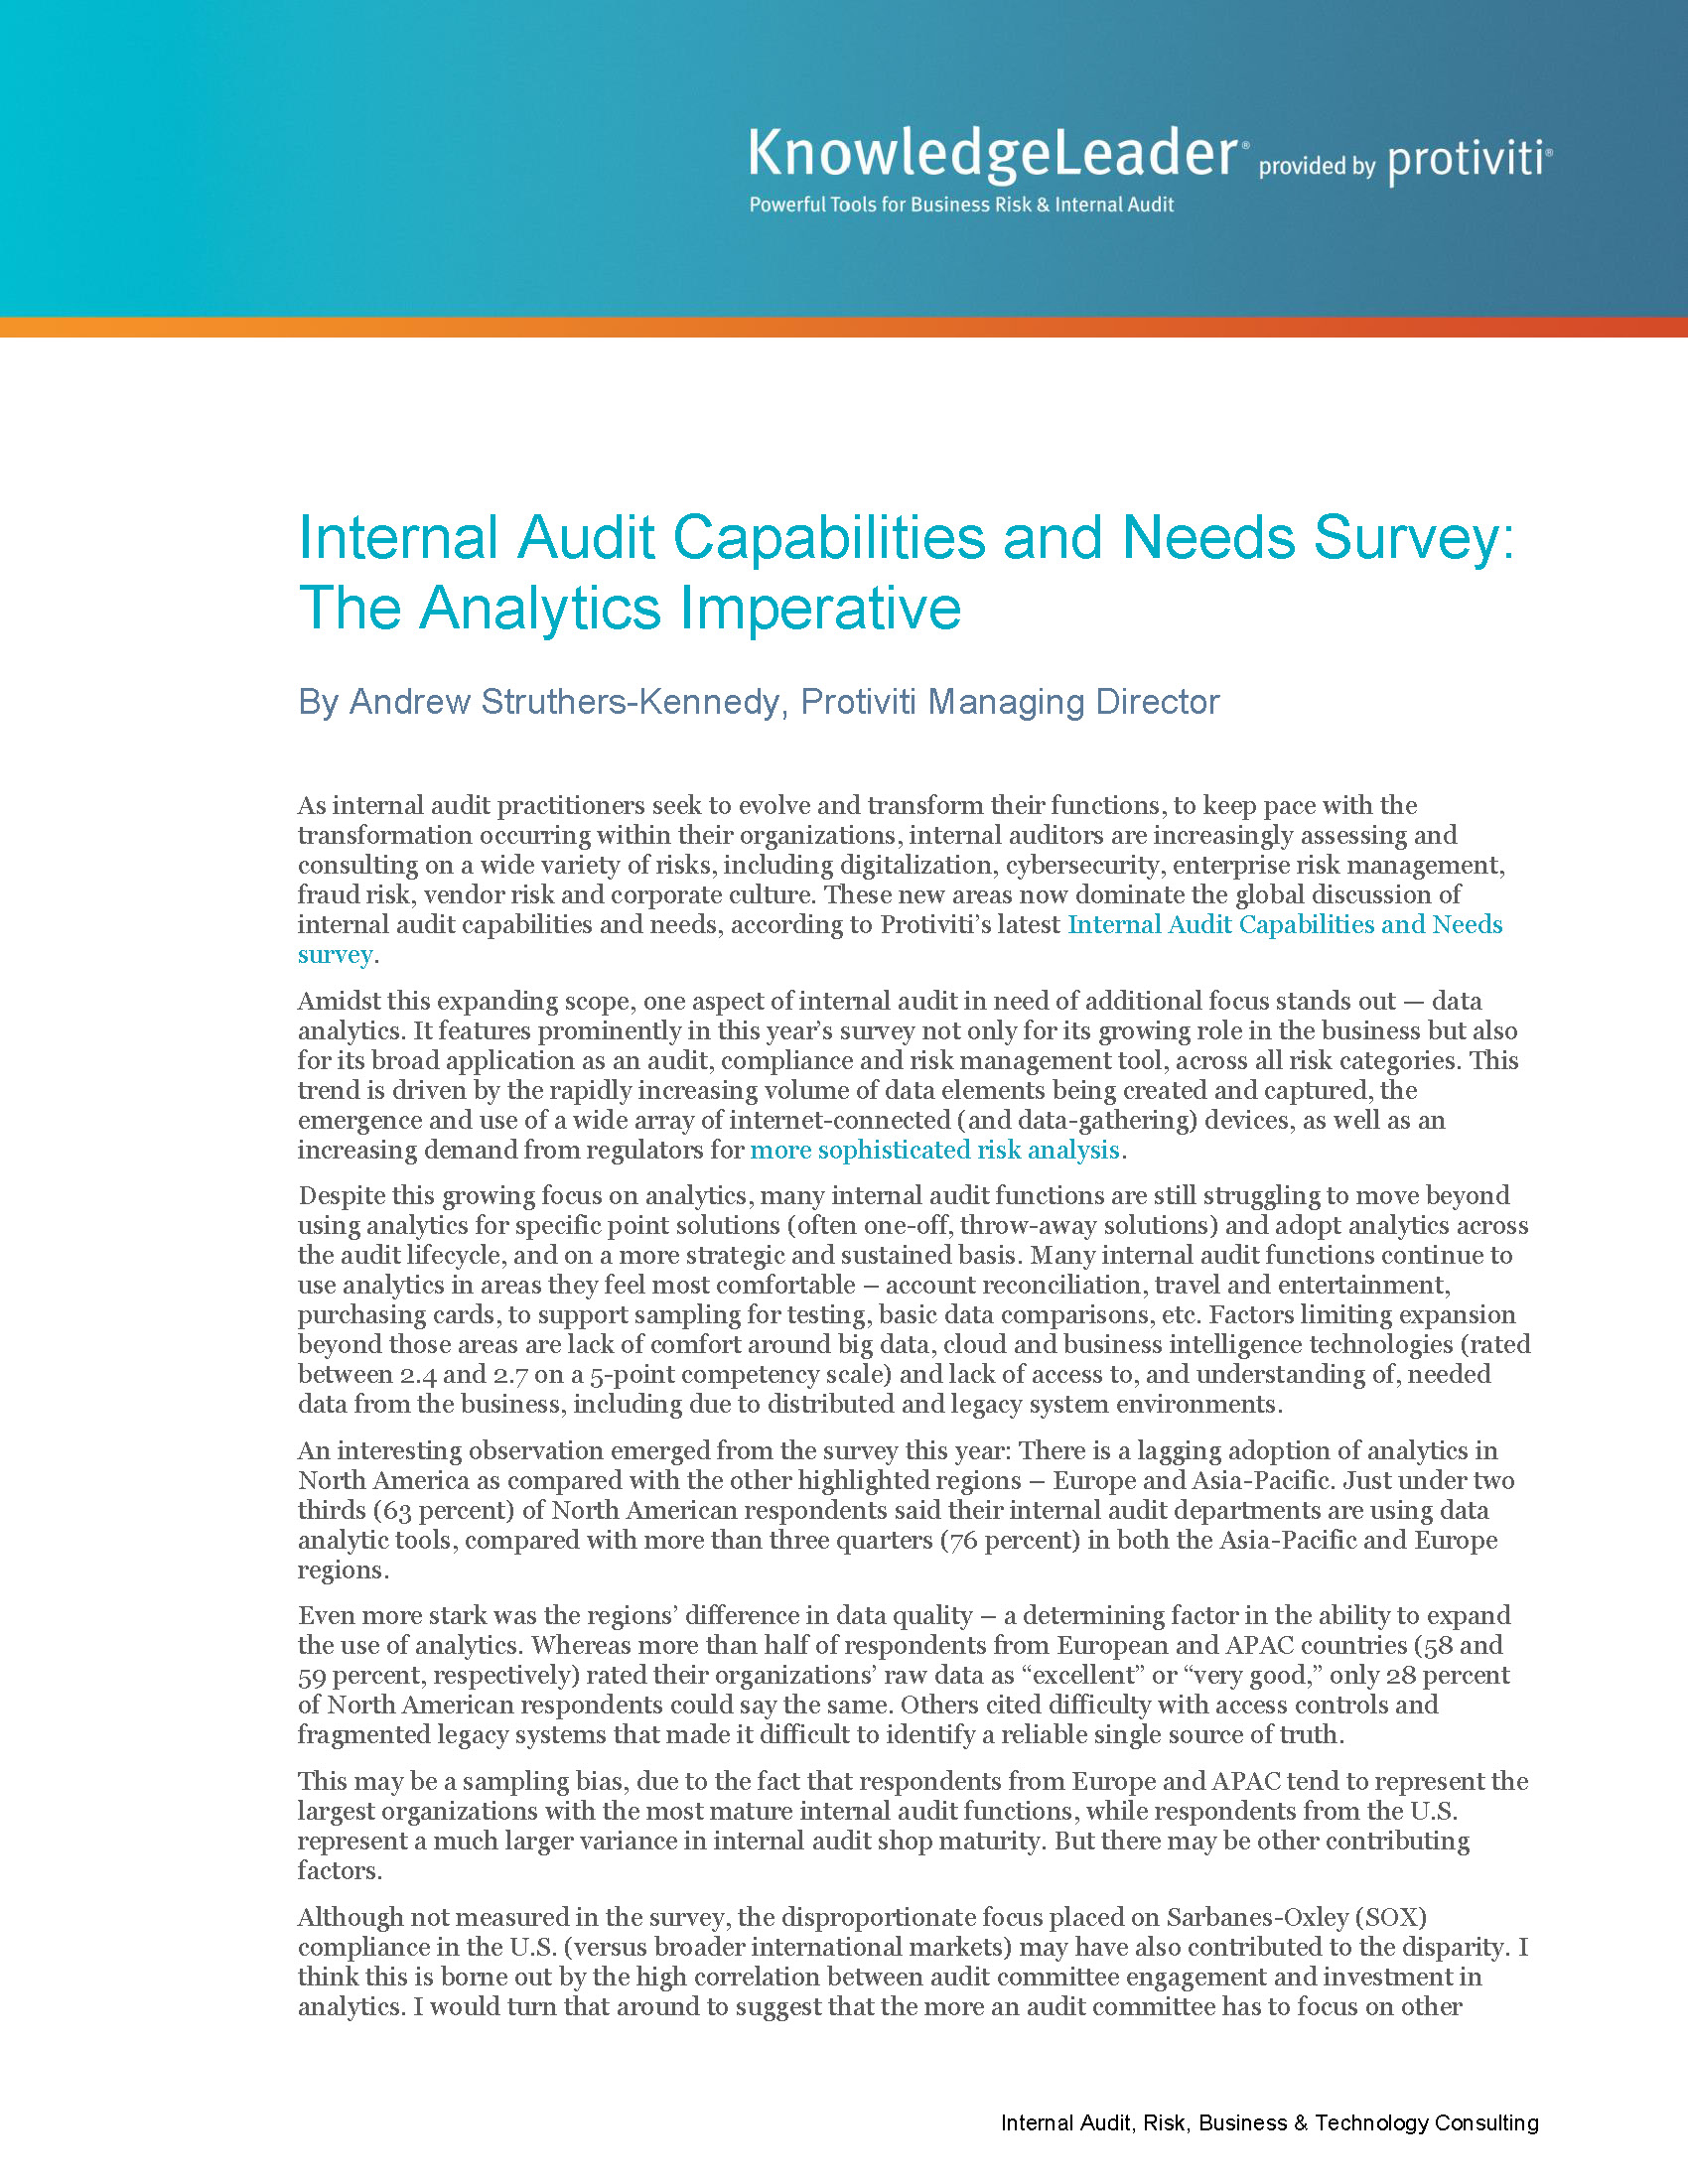 Screenshot of the first page of Internal Audit Capabilities and Needs Survey The Analytics Imperative